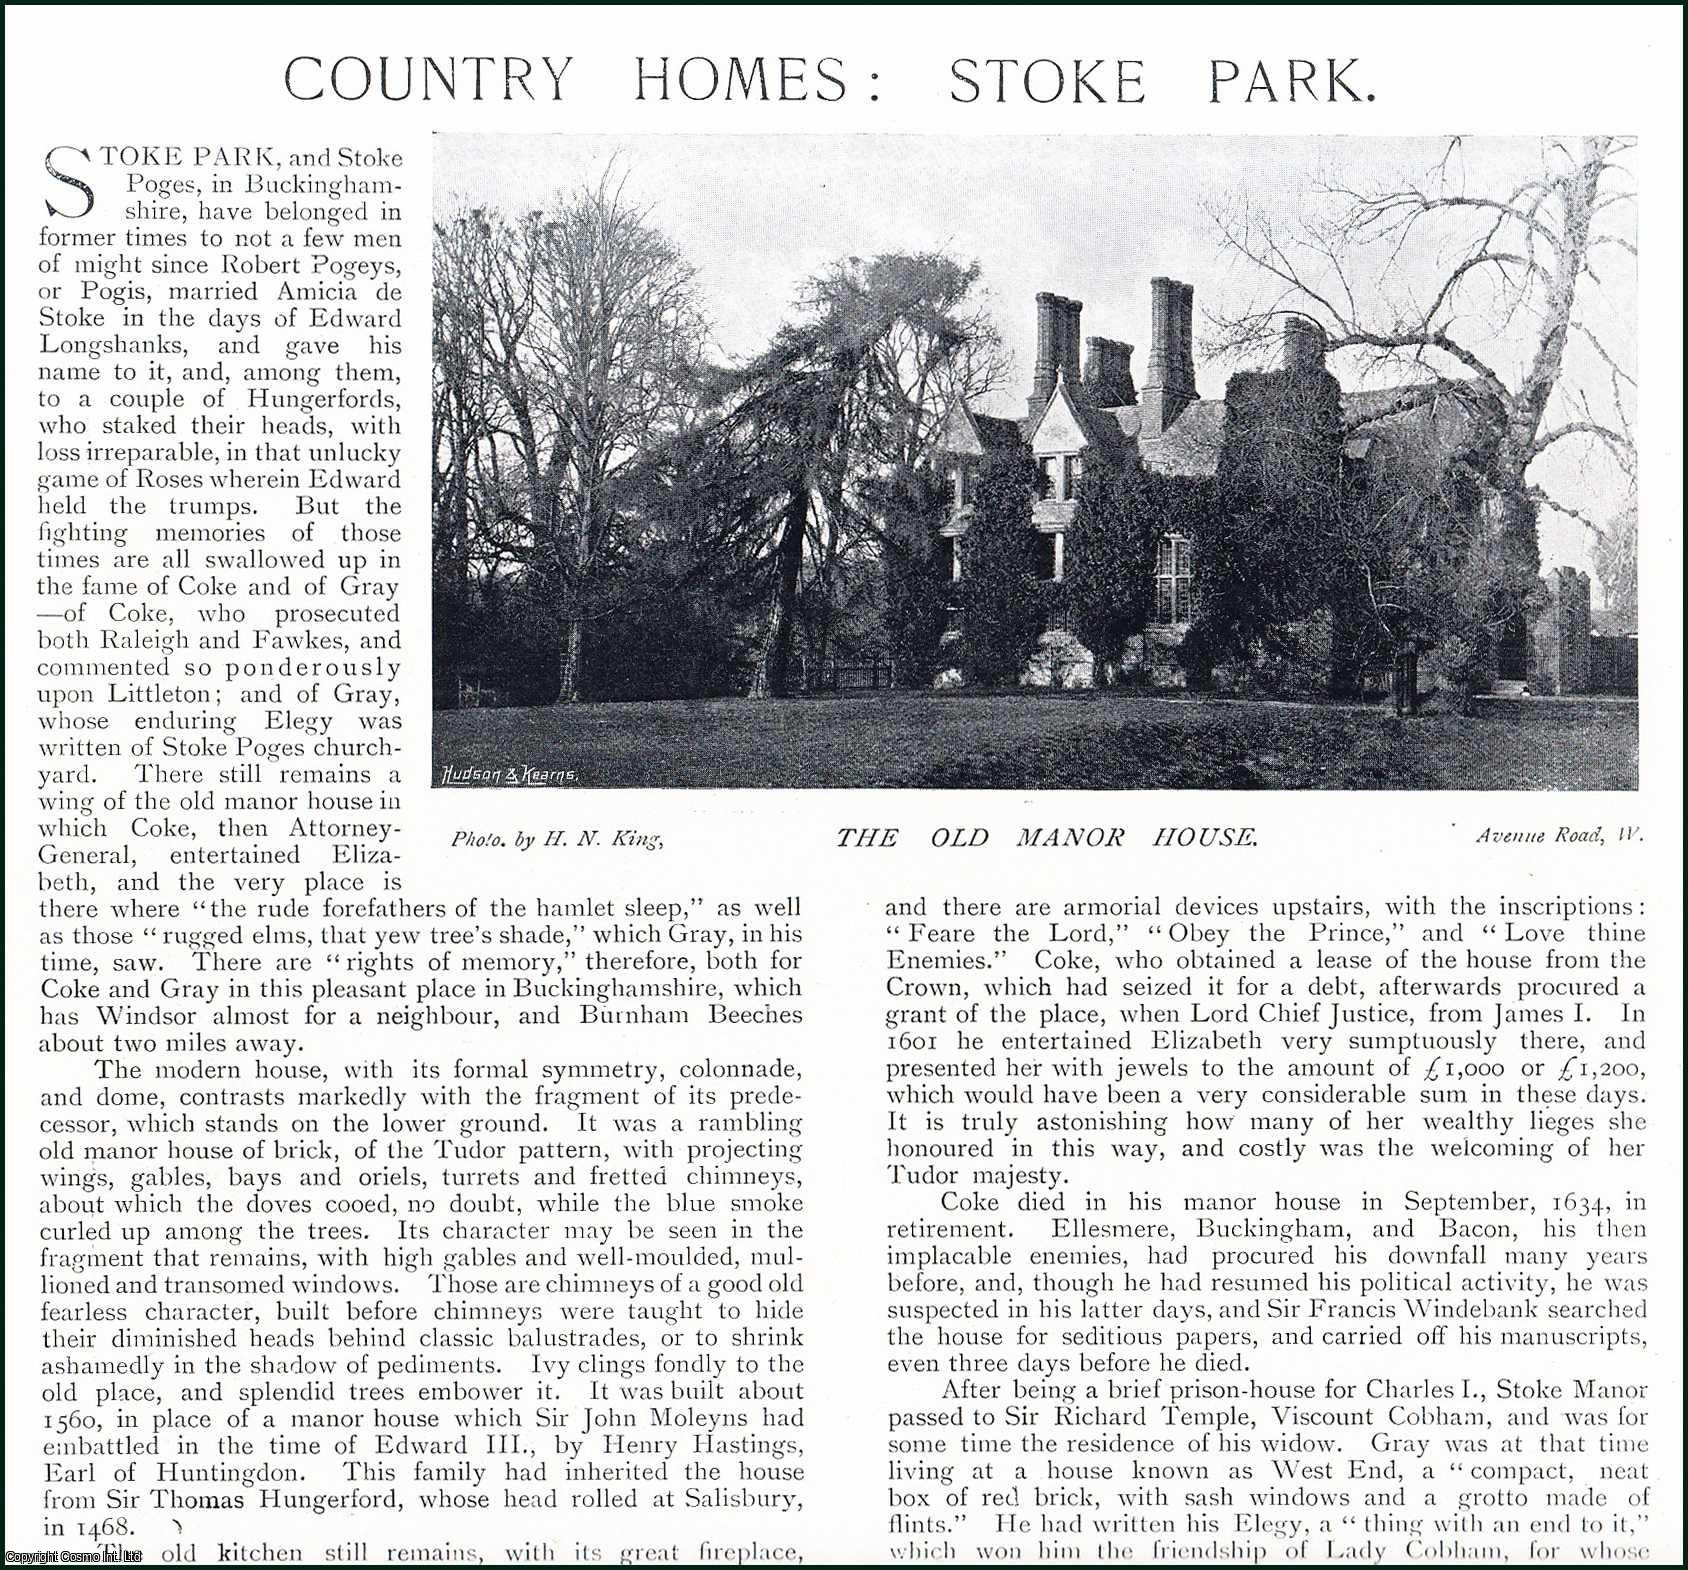 John Leyland - Stoke Park Country Home. Several pictures and accompanying text, removed from an original issue of Country Life Magazine, 1897.